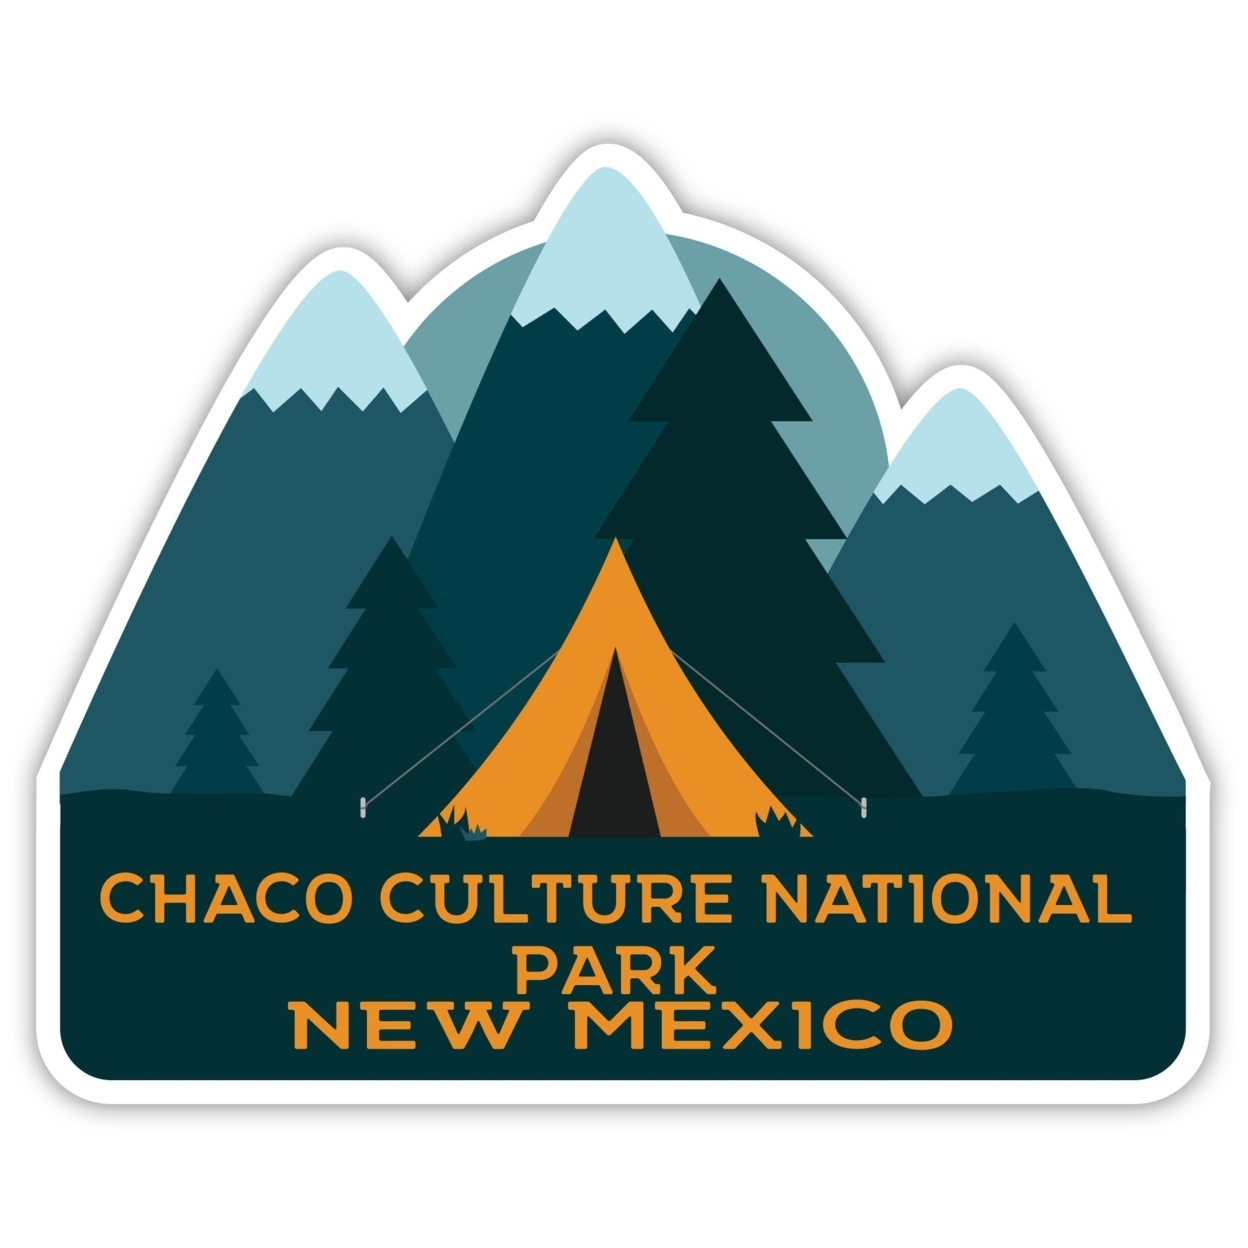 Chaco Culture National Park New Mexico Souvenir Decorative Stickers (Choose Theme And Size) - 4-Pack, 10-Inch, Tent